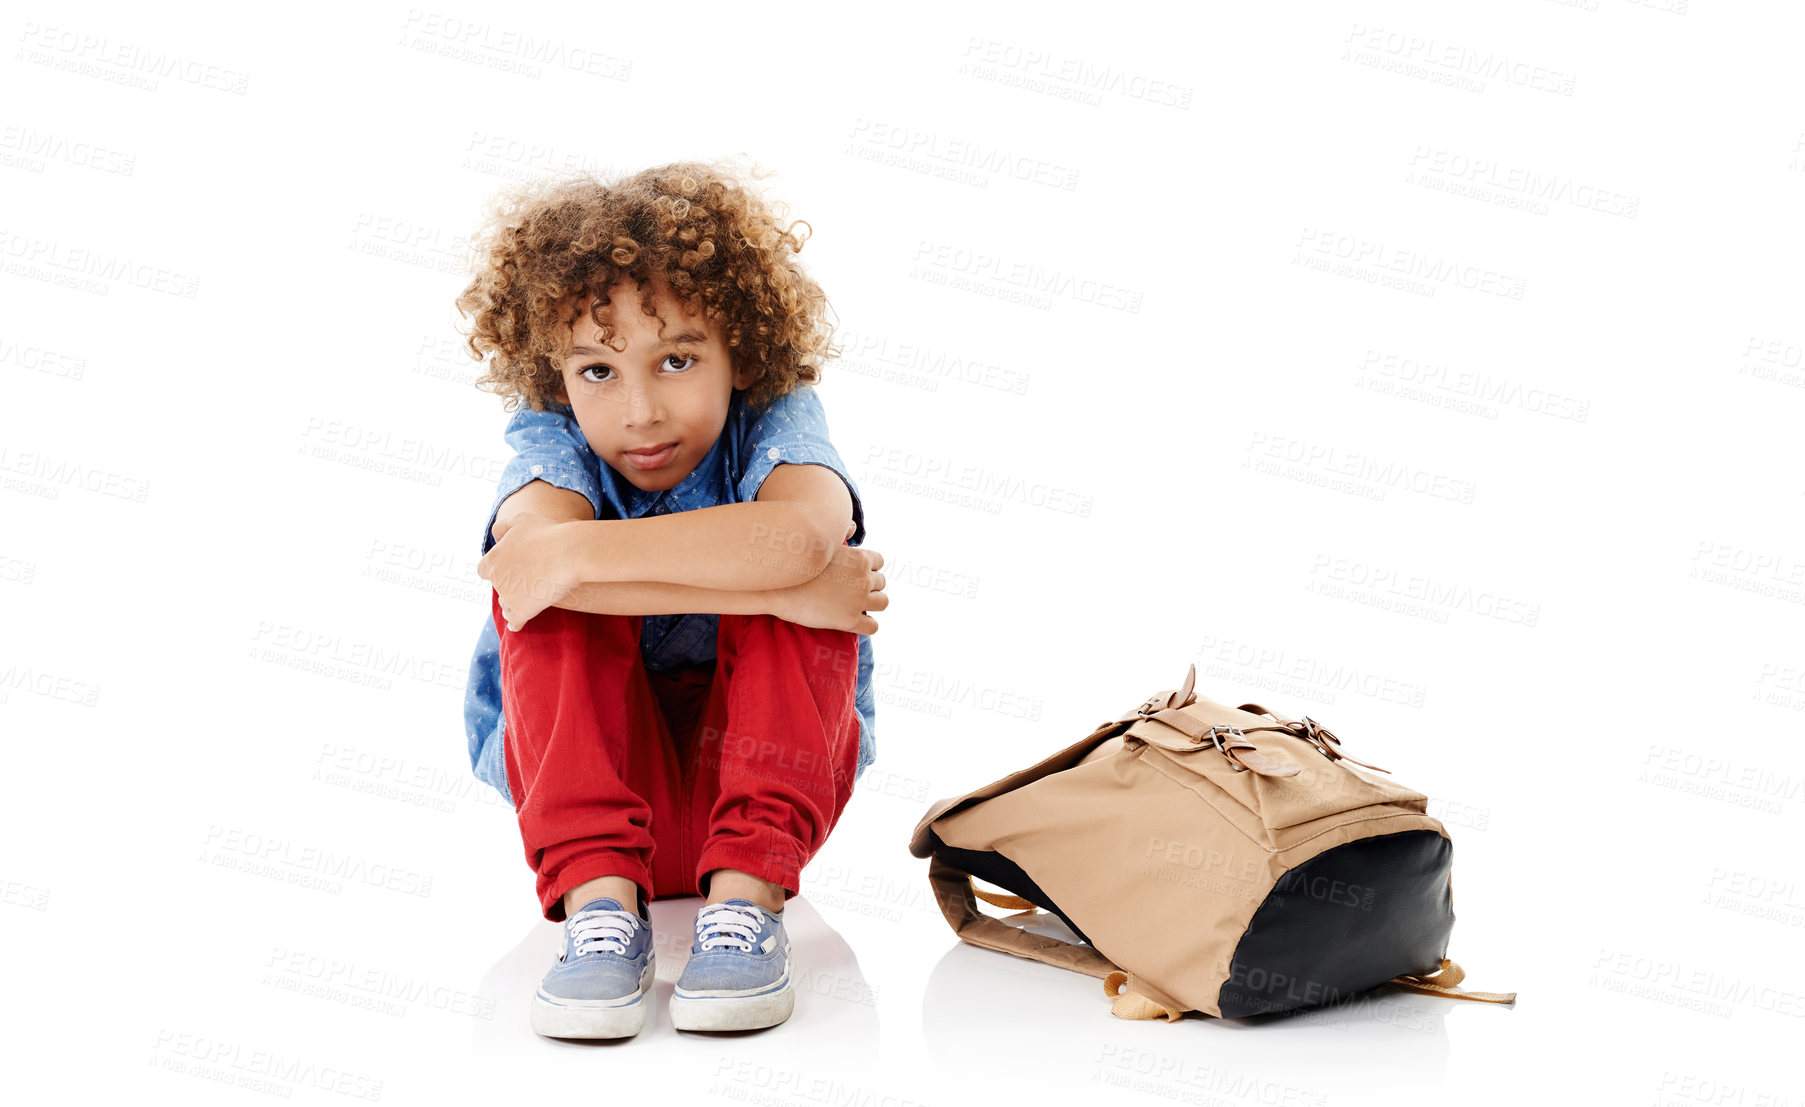 Buy stock photo Studio shot of a cute little boy hugging his knees next to his schoolbag against a white background